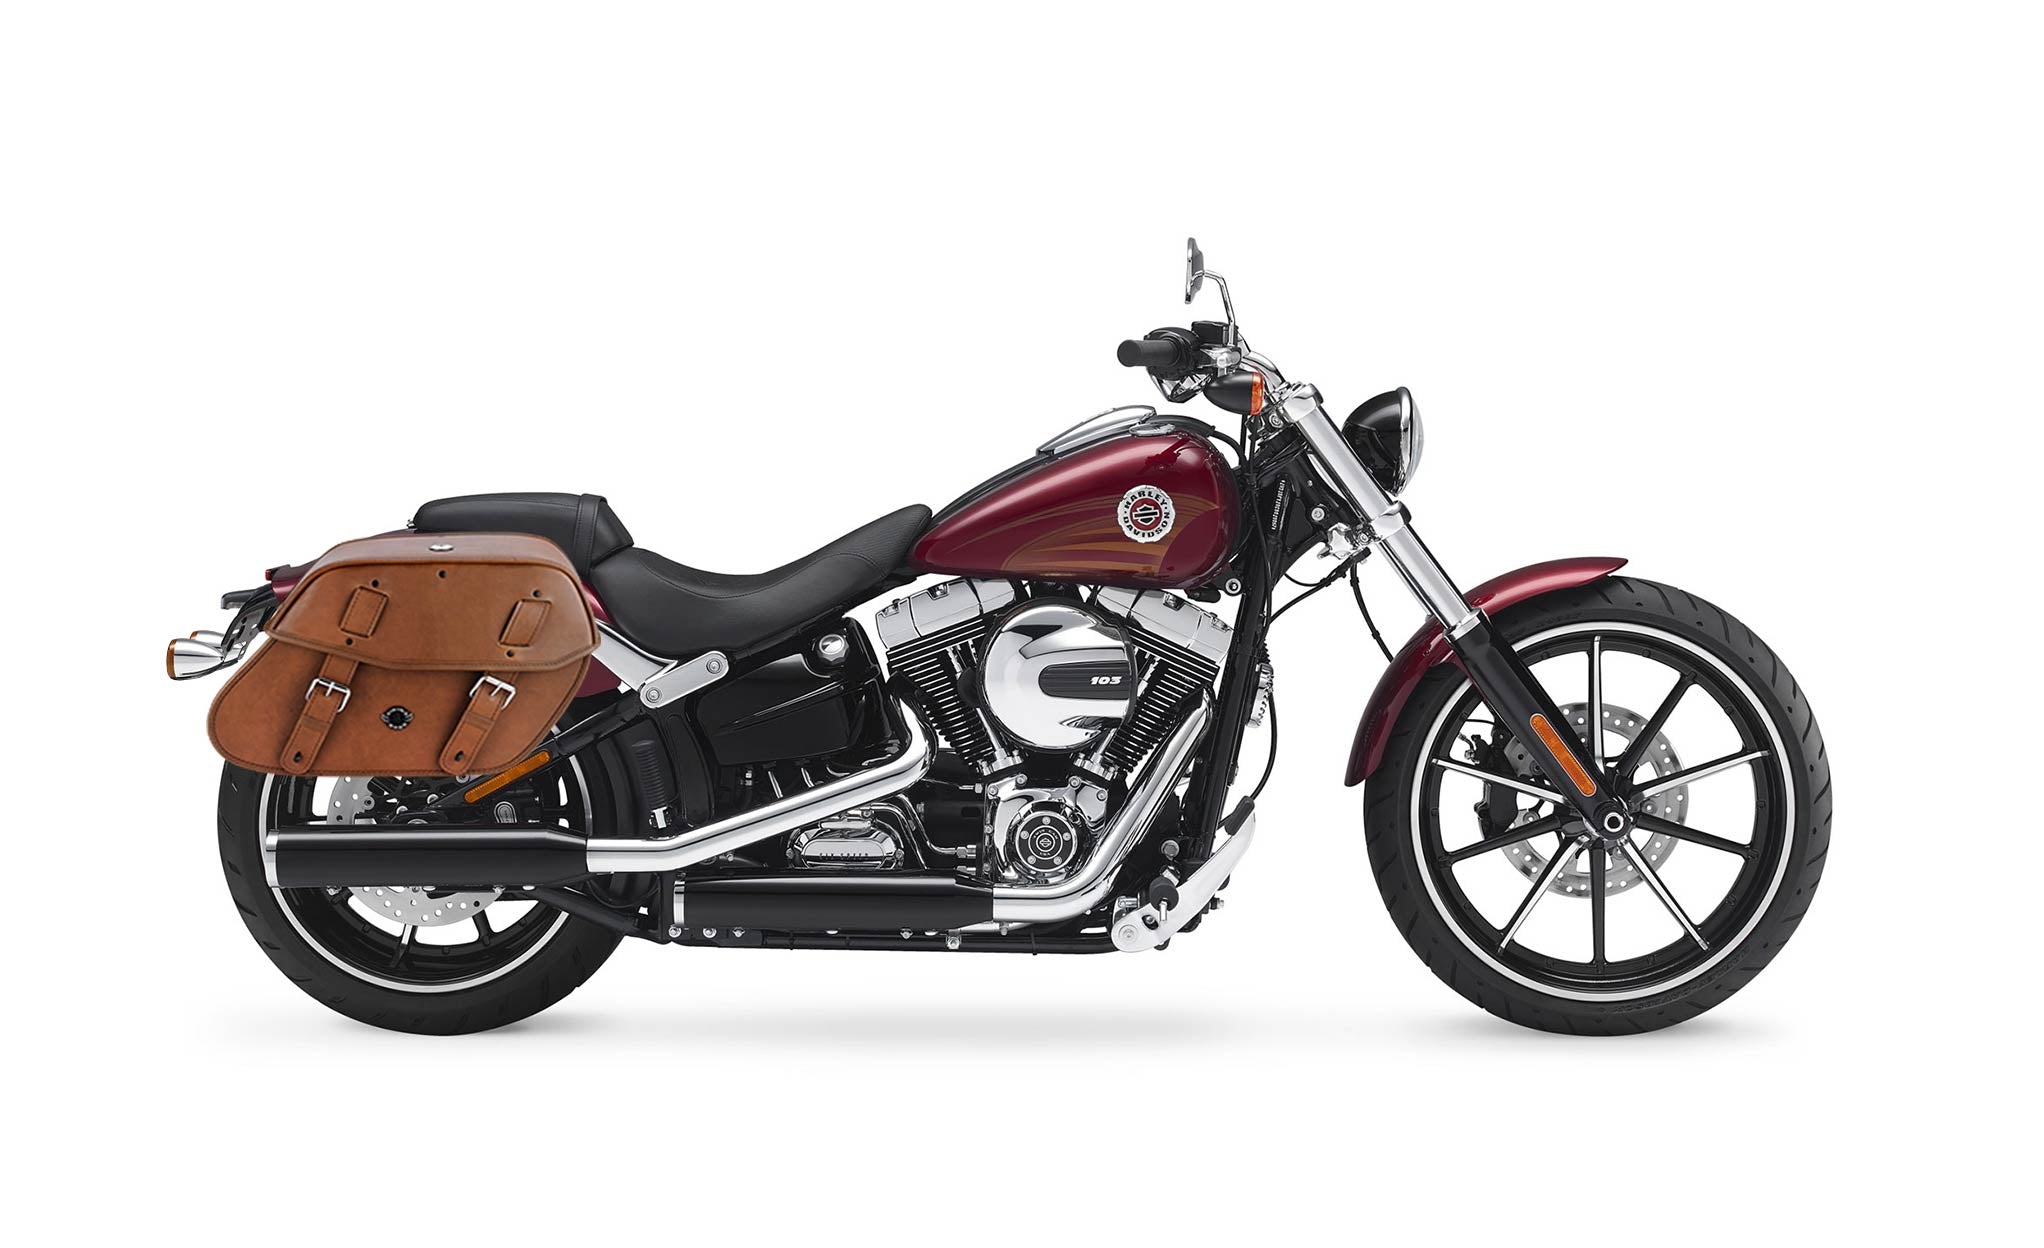 Viking Odin Brown Large Leather Motorcycle Saddlebags For Harley Softail Breakout Fxsb on Bike Photo @expand